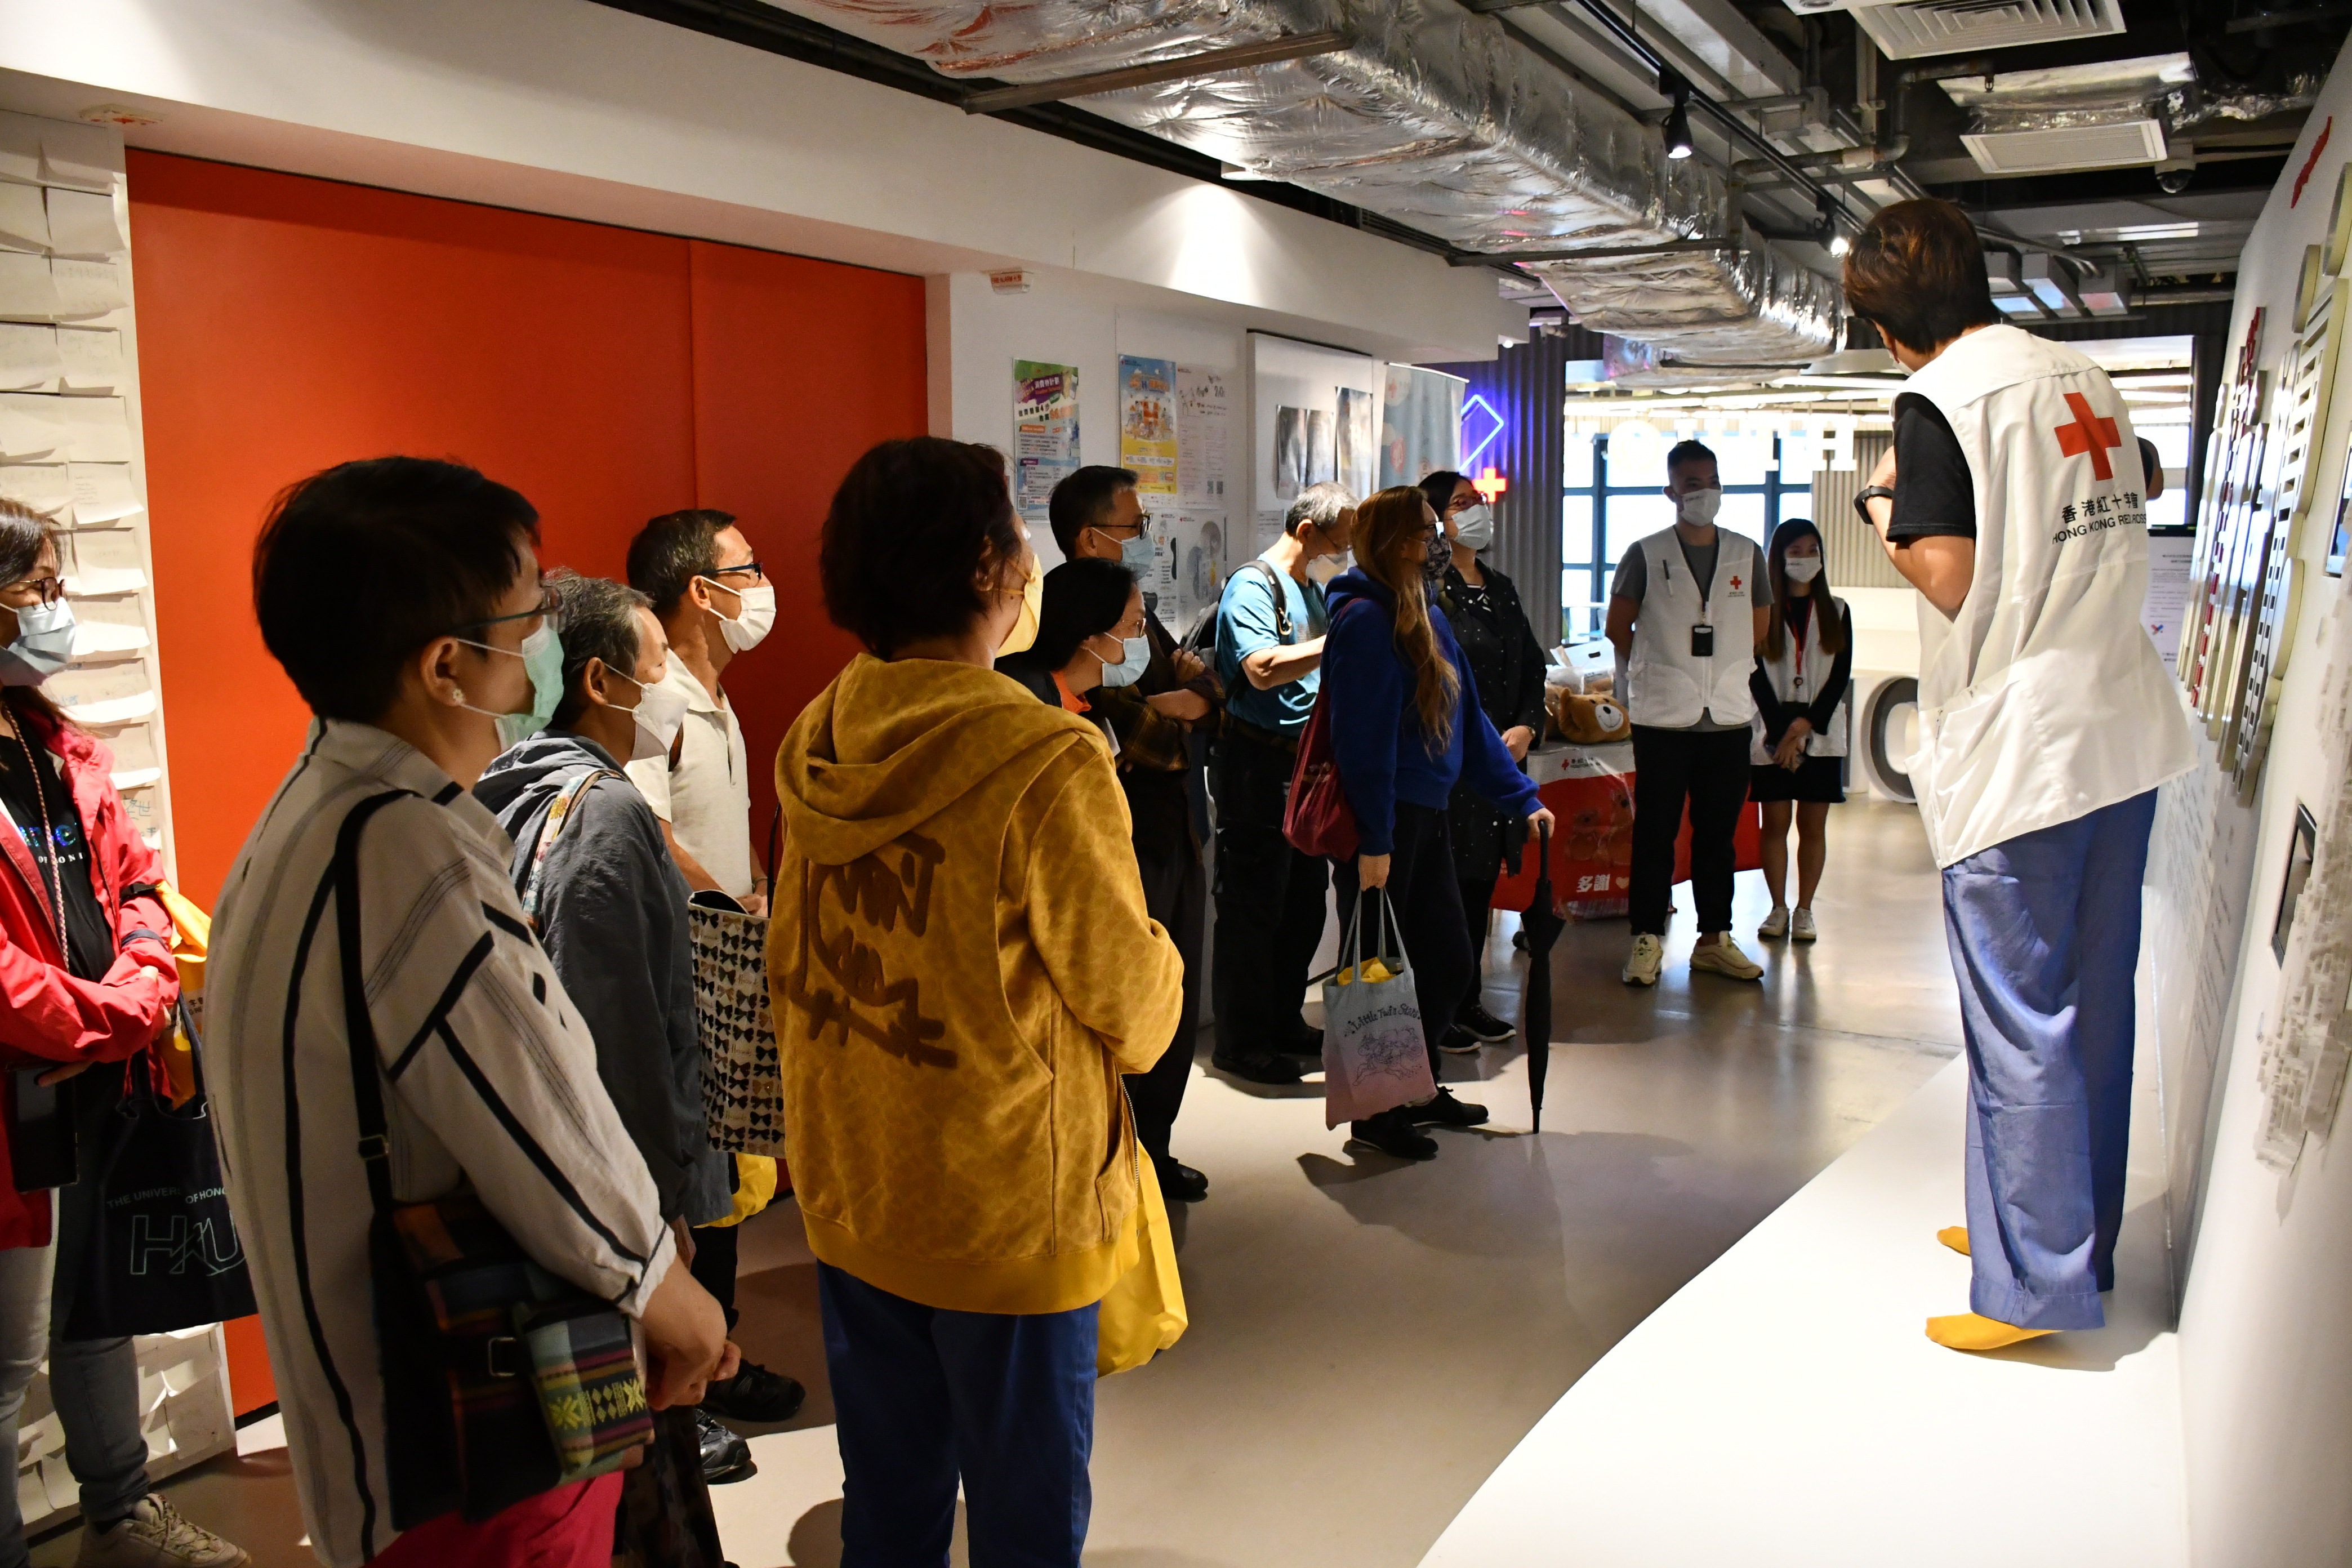 After the sharing session, the attendees were given a tour of the “Every One Matters” Photo Exhibition and “Humanity Wall” by HKRC representatives.